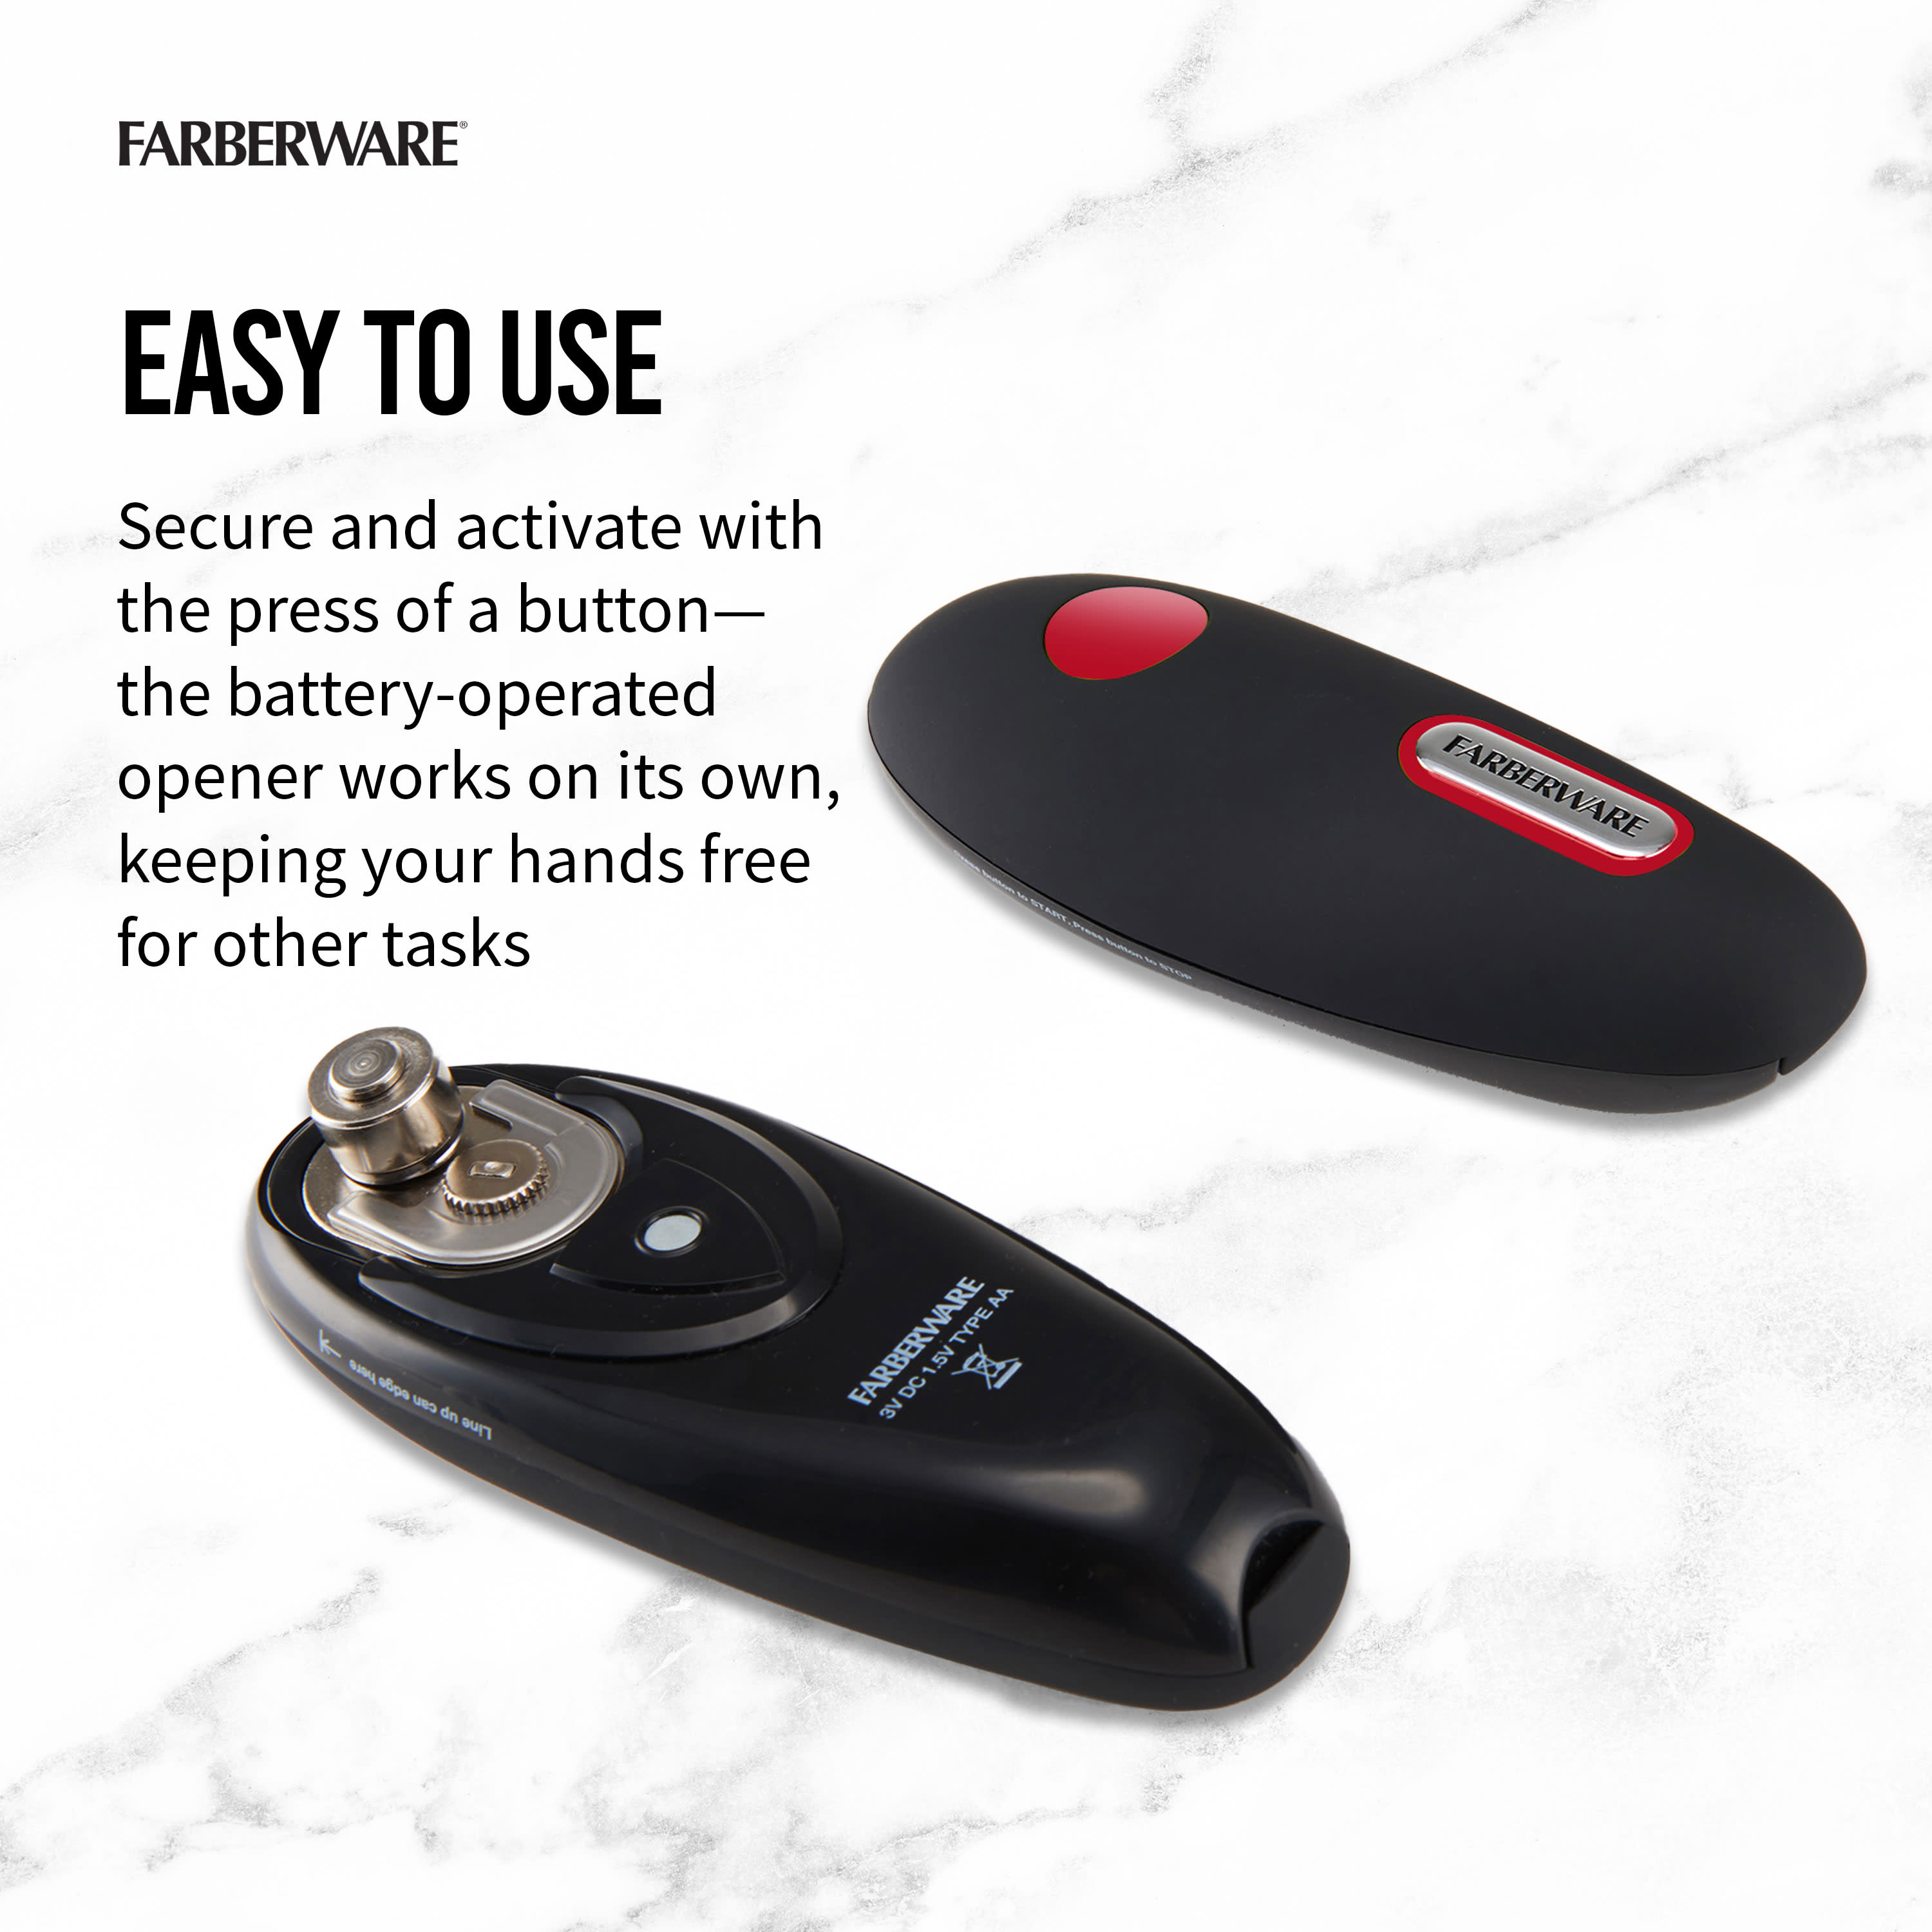 Farberware Hands-Free Battery-Operated Black Can Opener in Red - image 4 of 18